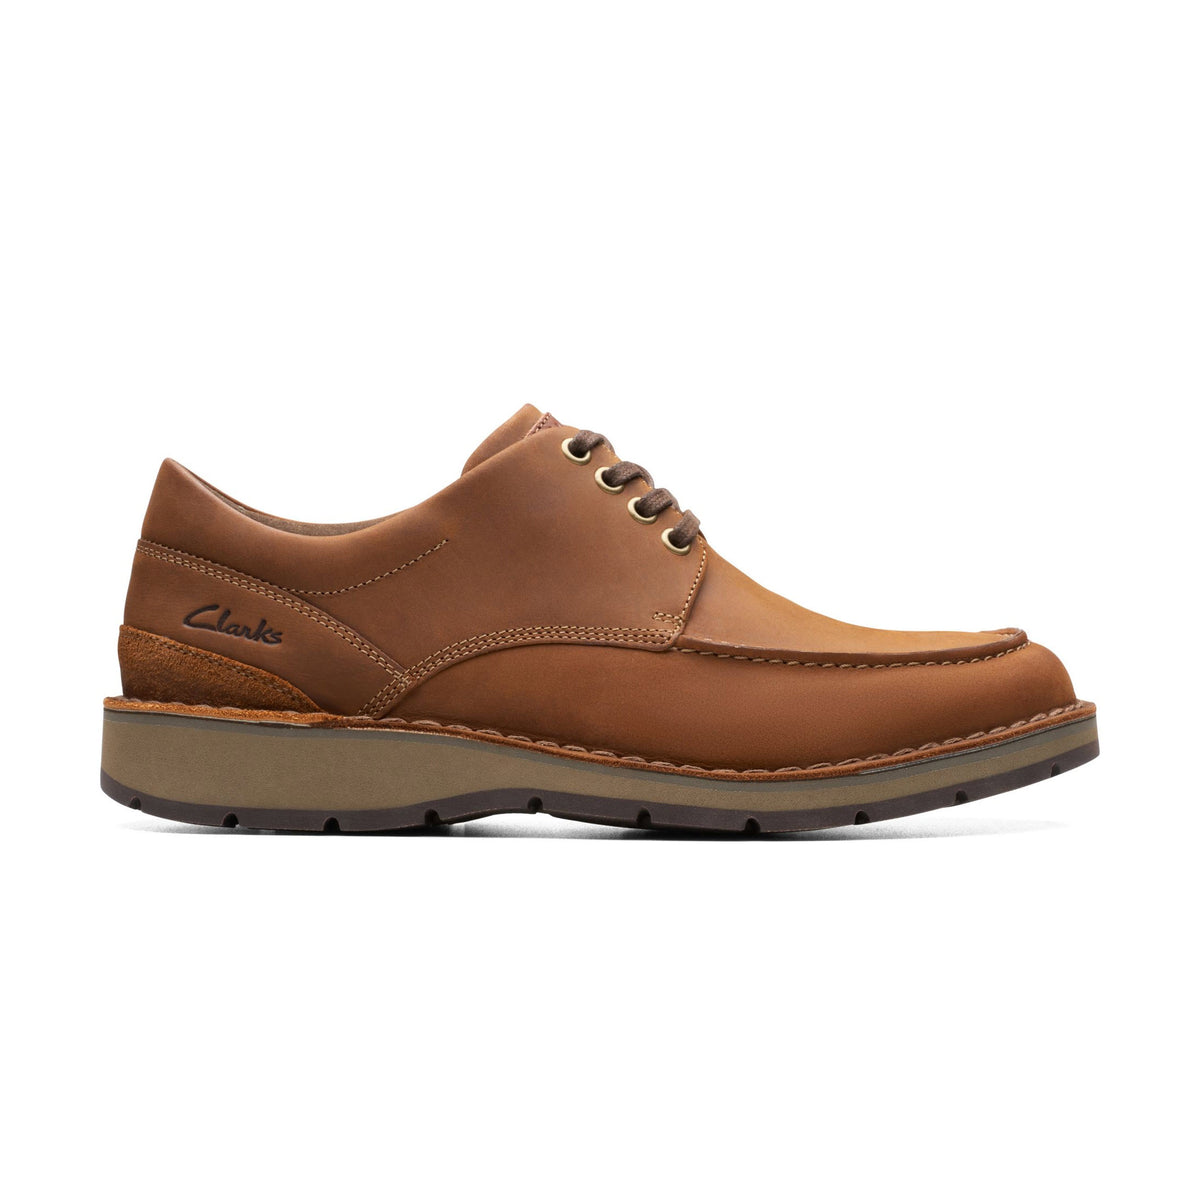 A single brown Clarks brand men&#39;s dress shoe, the CLARKS GRAVELLE LOW LACE OXFORD DARK BROWN NUBUCK, featuring premium nubuck, with a low heel and lace-up front, shown against a white background.